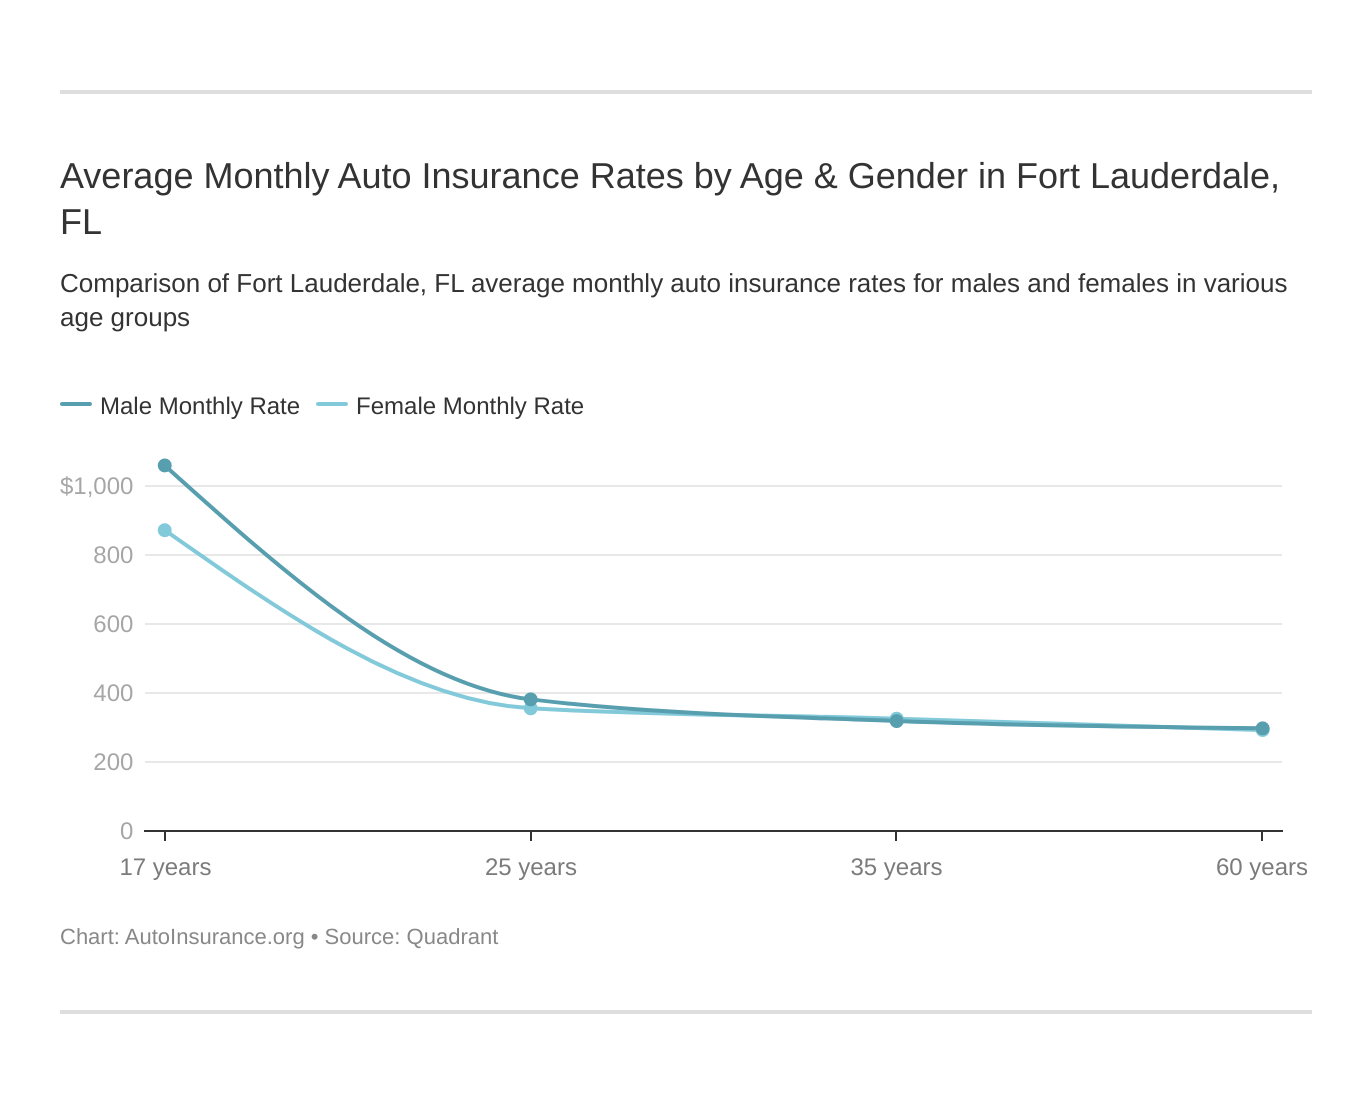 Average Monthly Auto Insurance Rates by Age & Gender in Fort Lauderdale, FL